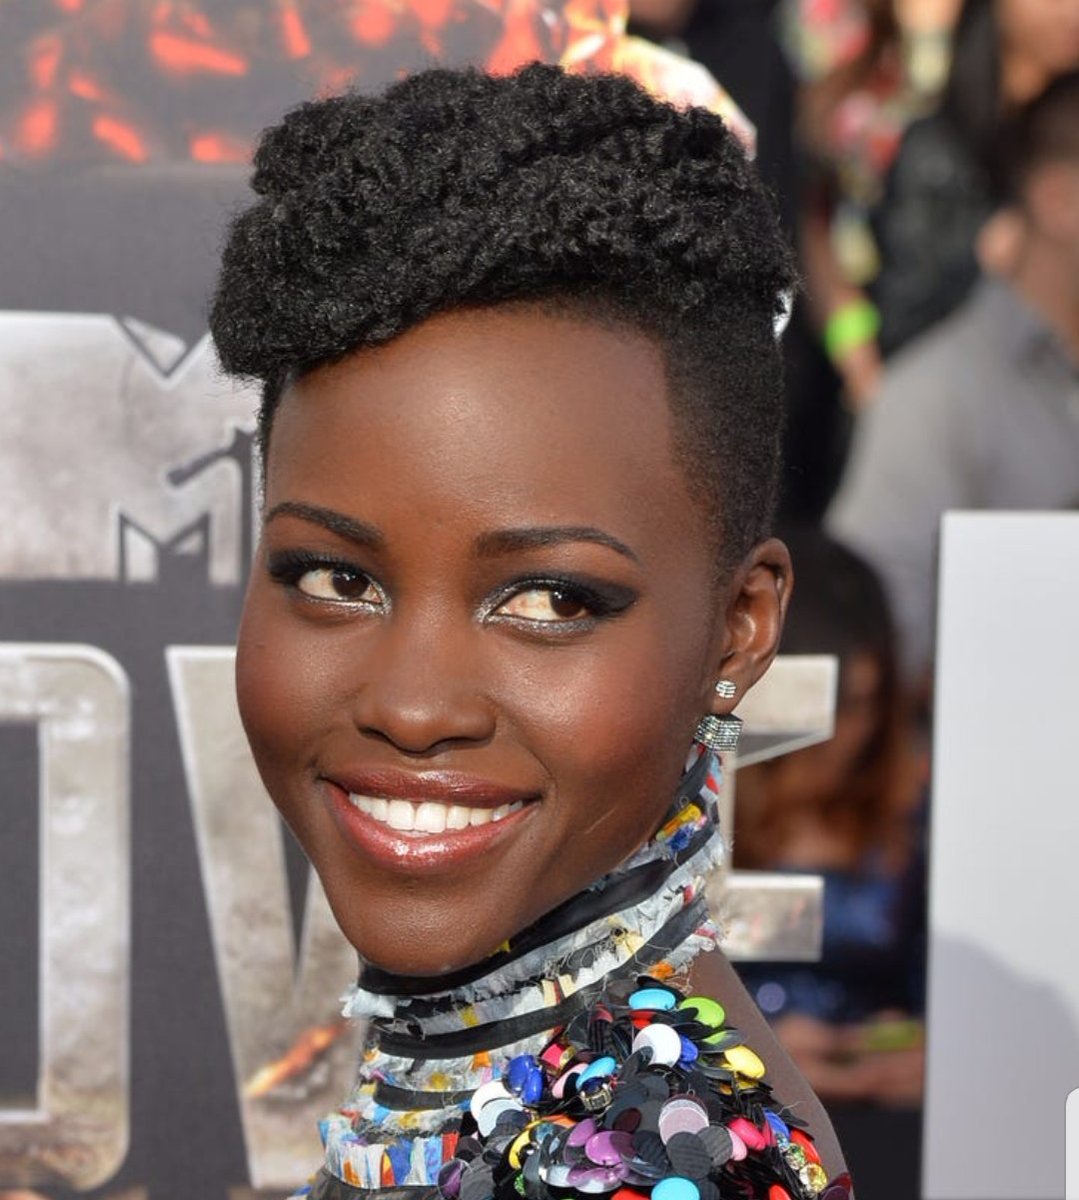 Iman and Lupita Nyong'o are examples of people who have eurocentric features even though they are obviously not white. Their eurocentric features do not come from some whiteness in their DNA. These are African features.